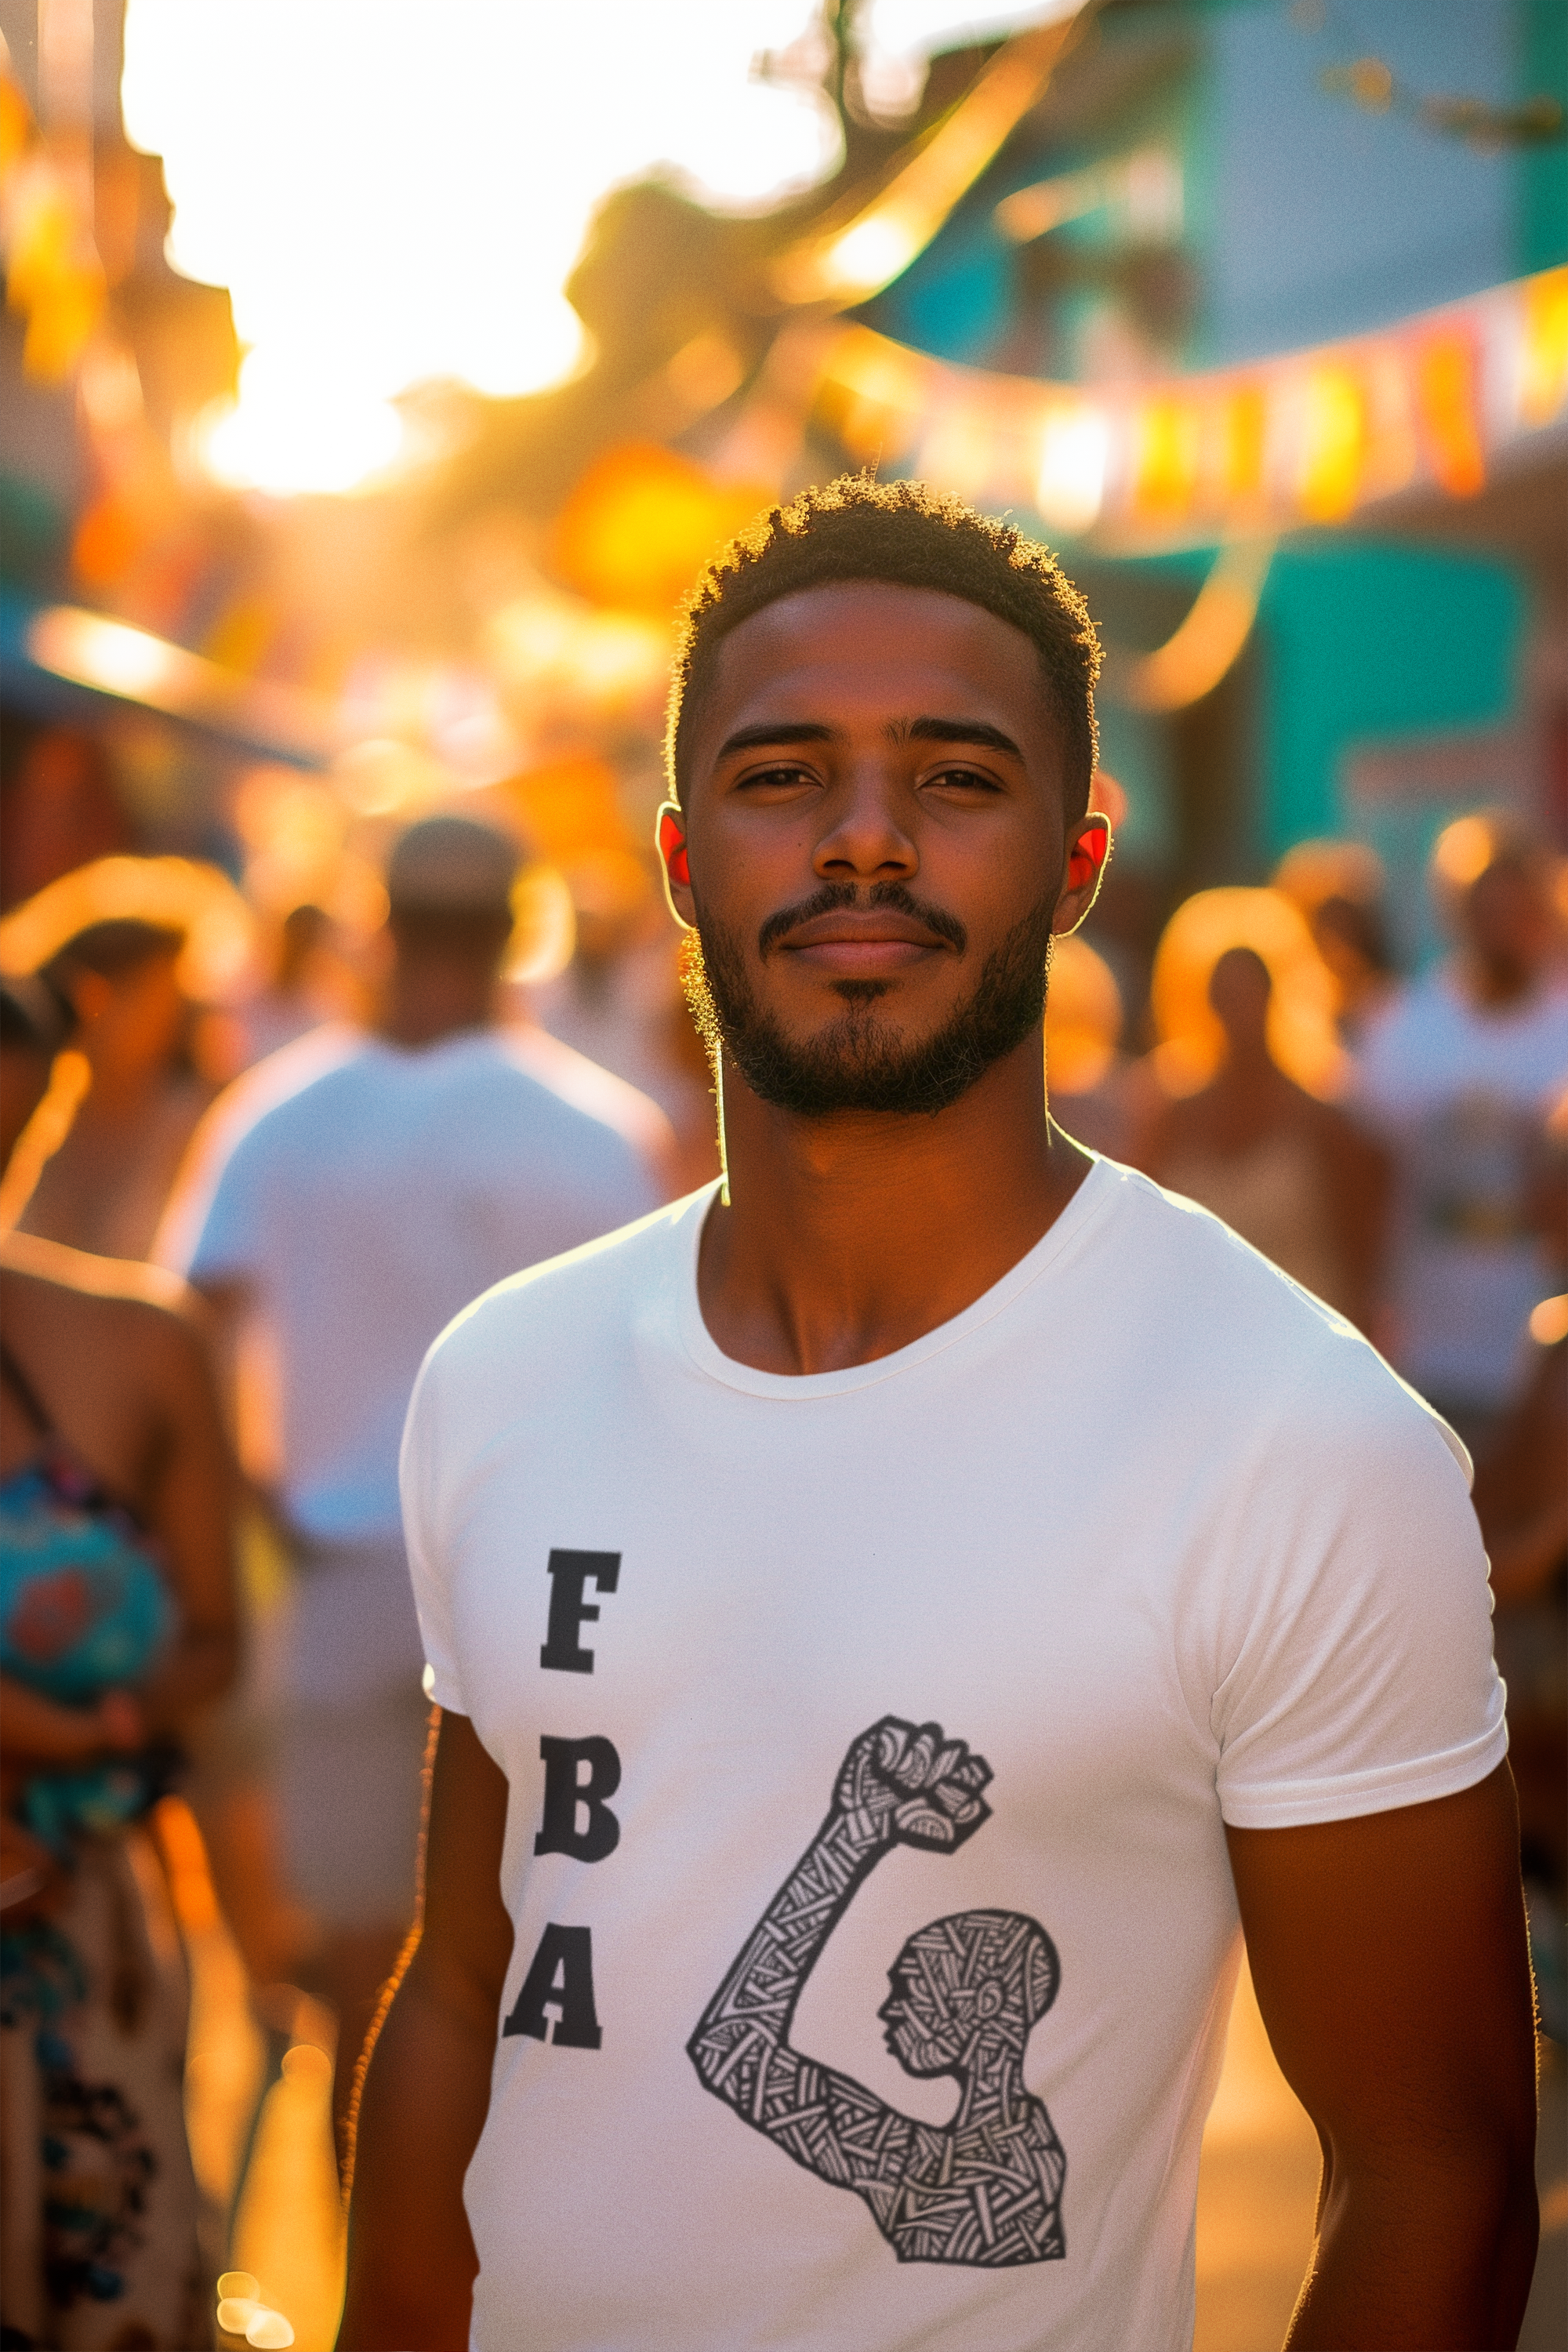 The image features a classic unisex cotton ringer t-shirt with bold "FBA Pride" text prominently displayed on the front. The shirt is designed with contrasting trim on the collar and sleeves, adding a stylish retro touch. The high-quality cotton fabric ensures a comfortable fit, making it perfect for showcasing your heritage proudly.